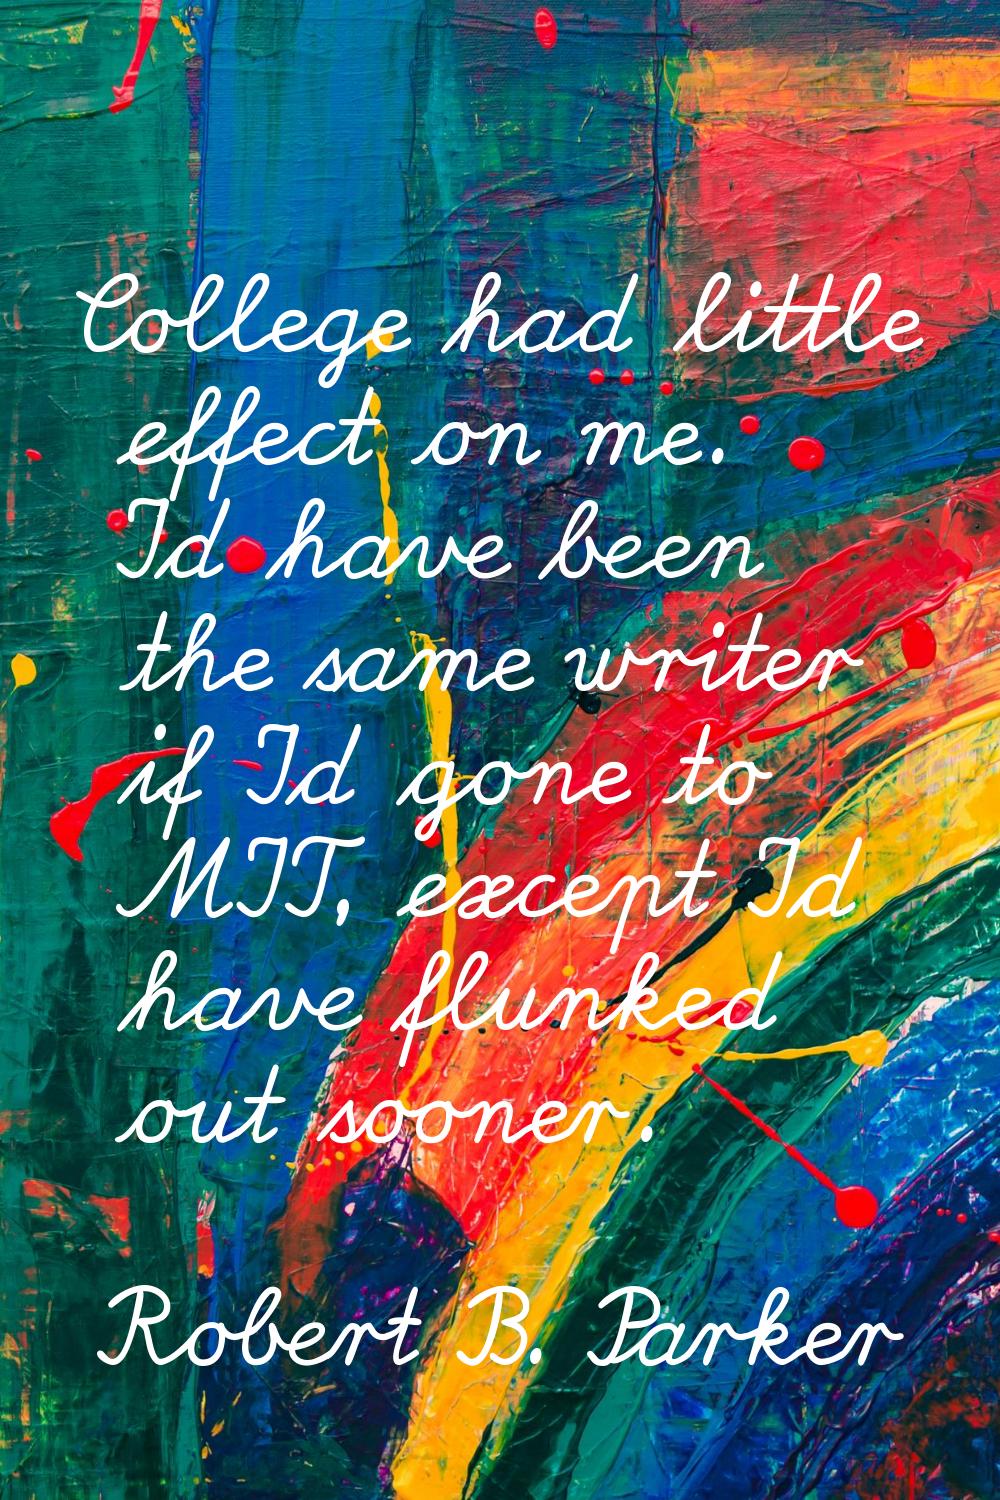 College had little effect on me. I'd have been the same writer if I'd gone to MIT, except I'd have 